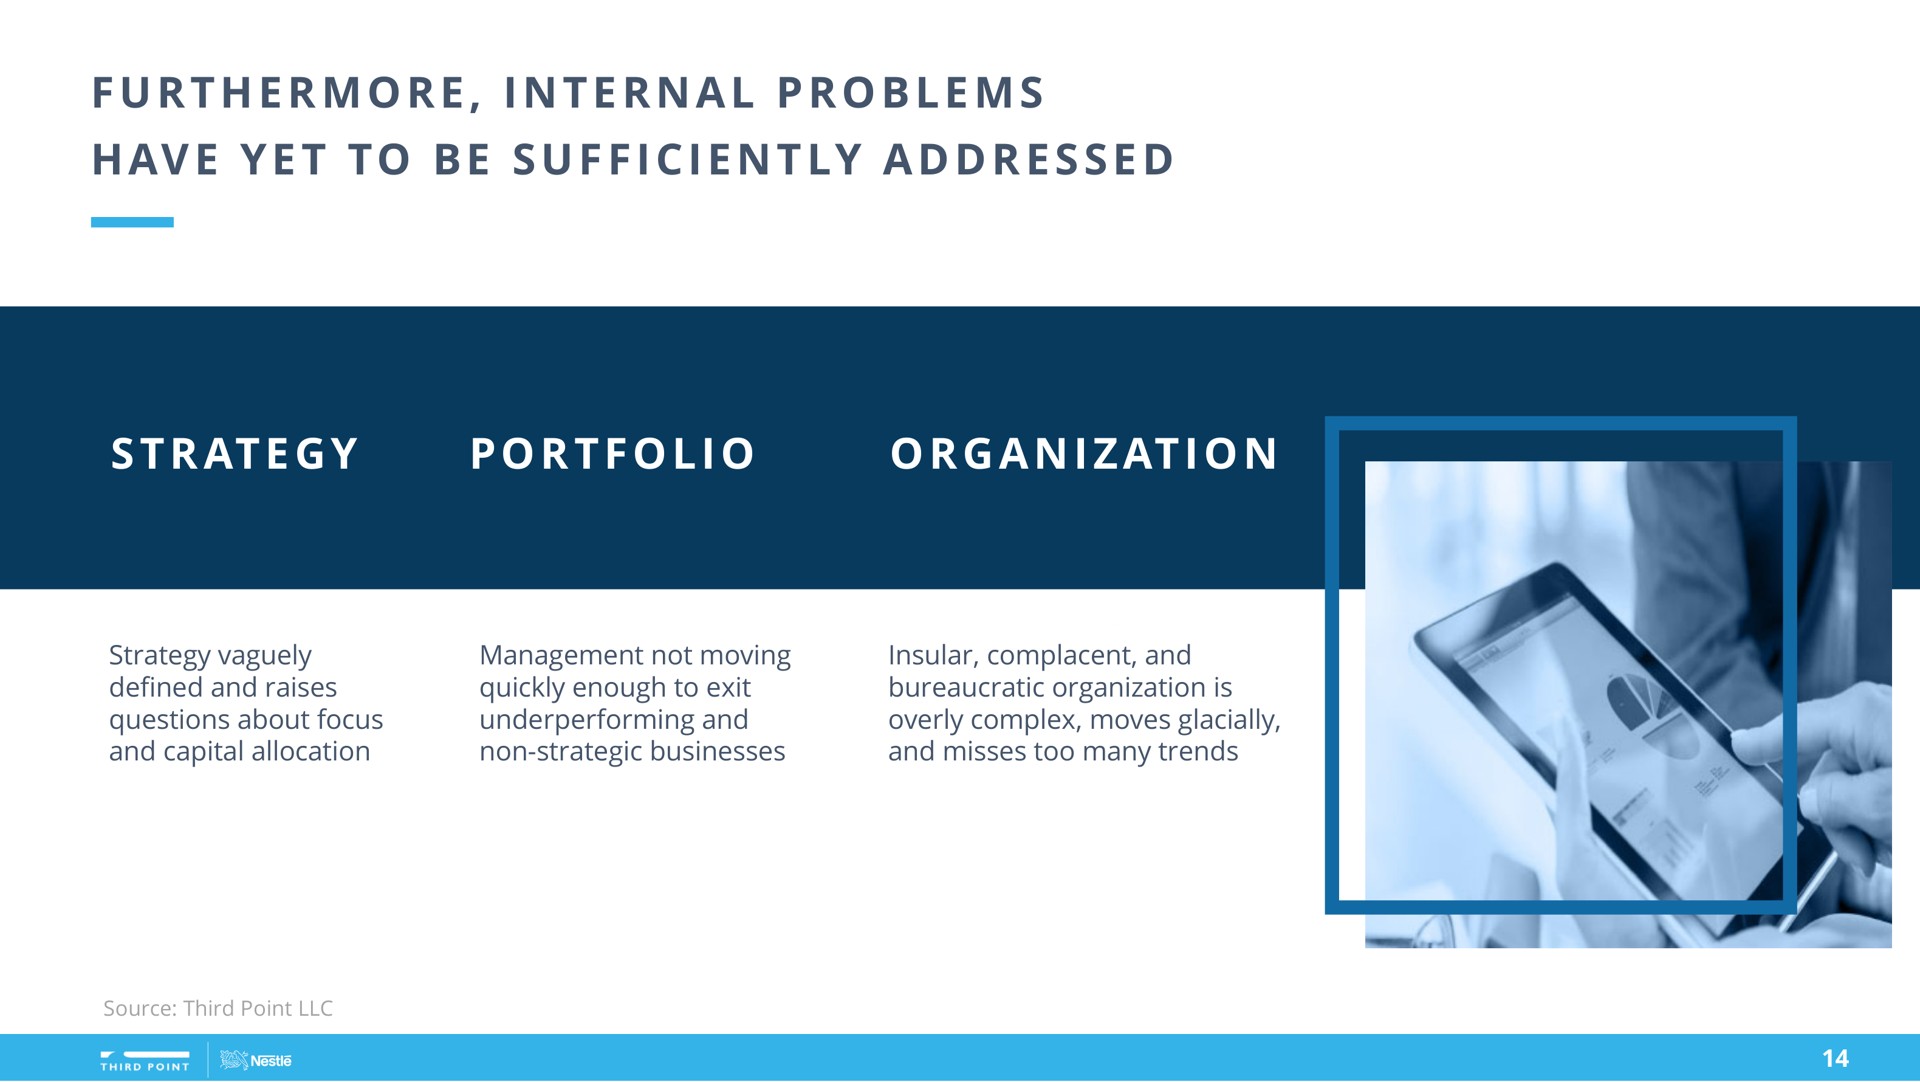 i a i i a at i a i at i furthermore internal problems have yet to be sufficiently addressed strategy portfolio organization | Third Point Management